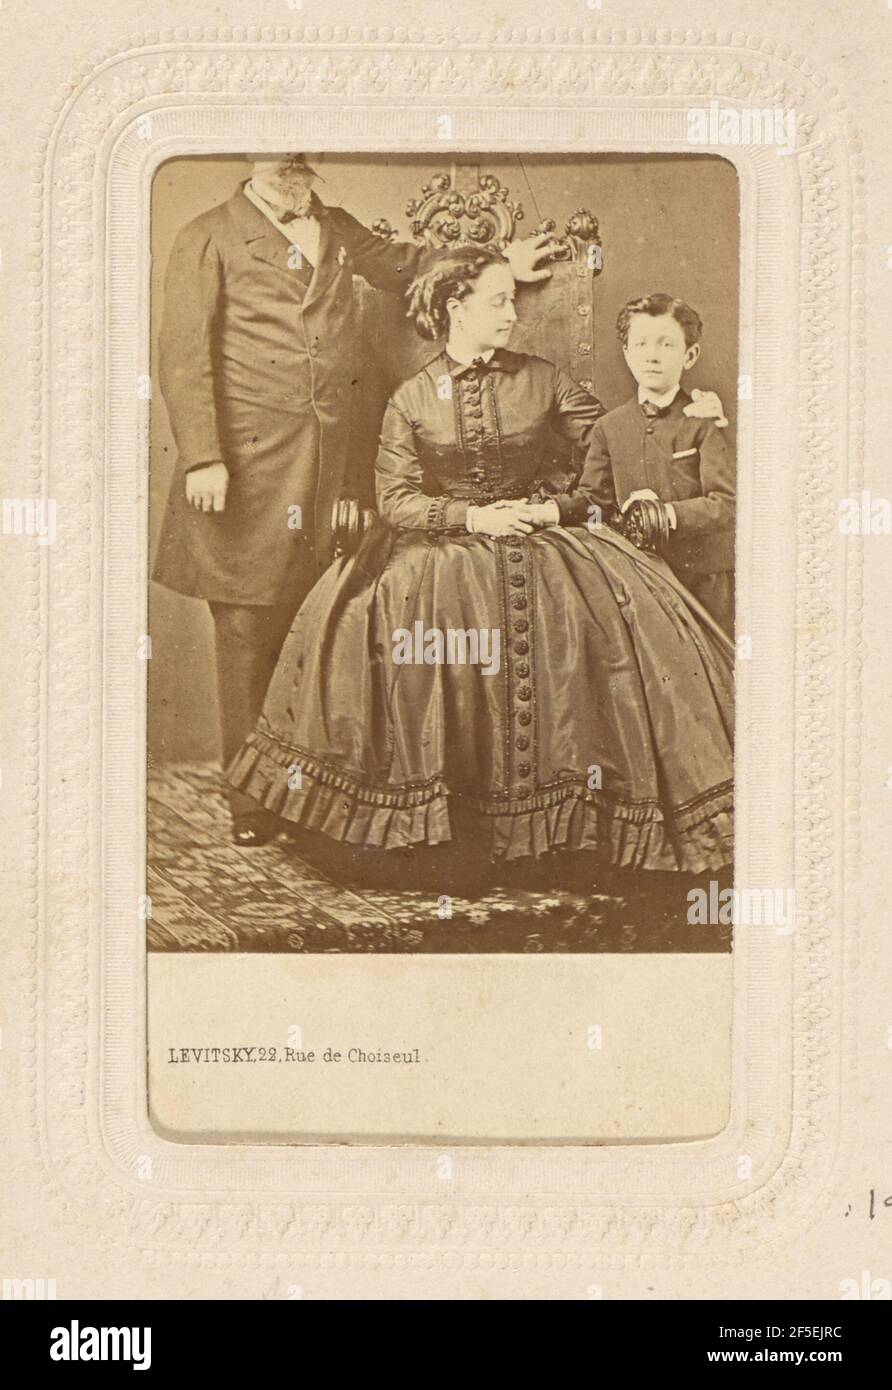 Emperor Napoleon III of France and Empress Eugenie in exile. News Photo -  Getty Images